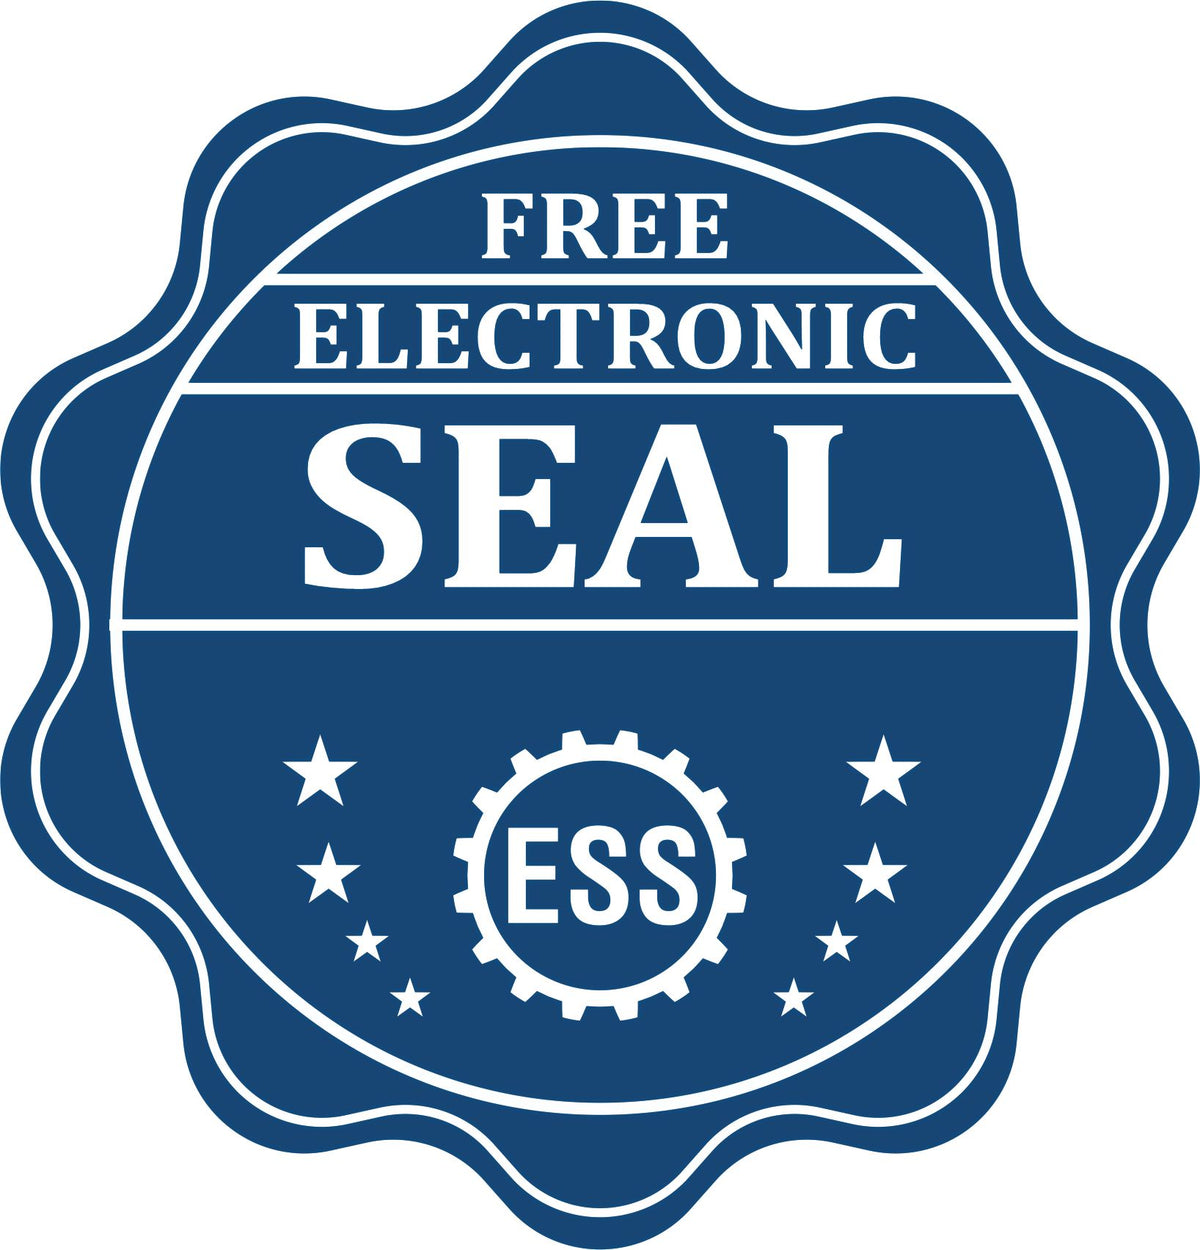 A badge showing a free electronic seal for the Heavy Duty Cast Iron Arizona Land Surveyor Seal Embosser with stars and the ESS gear on the emblem.